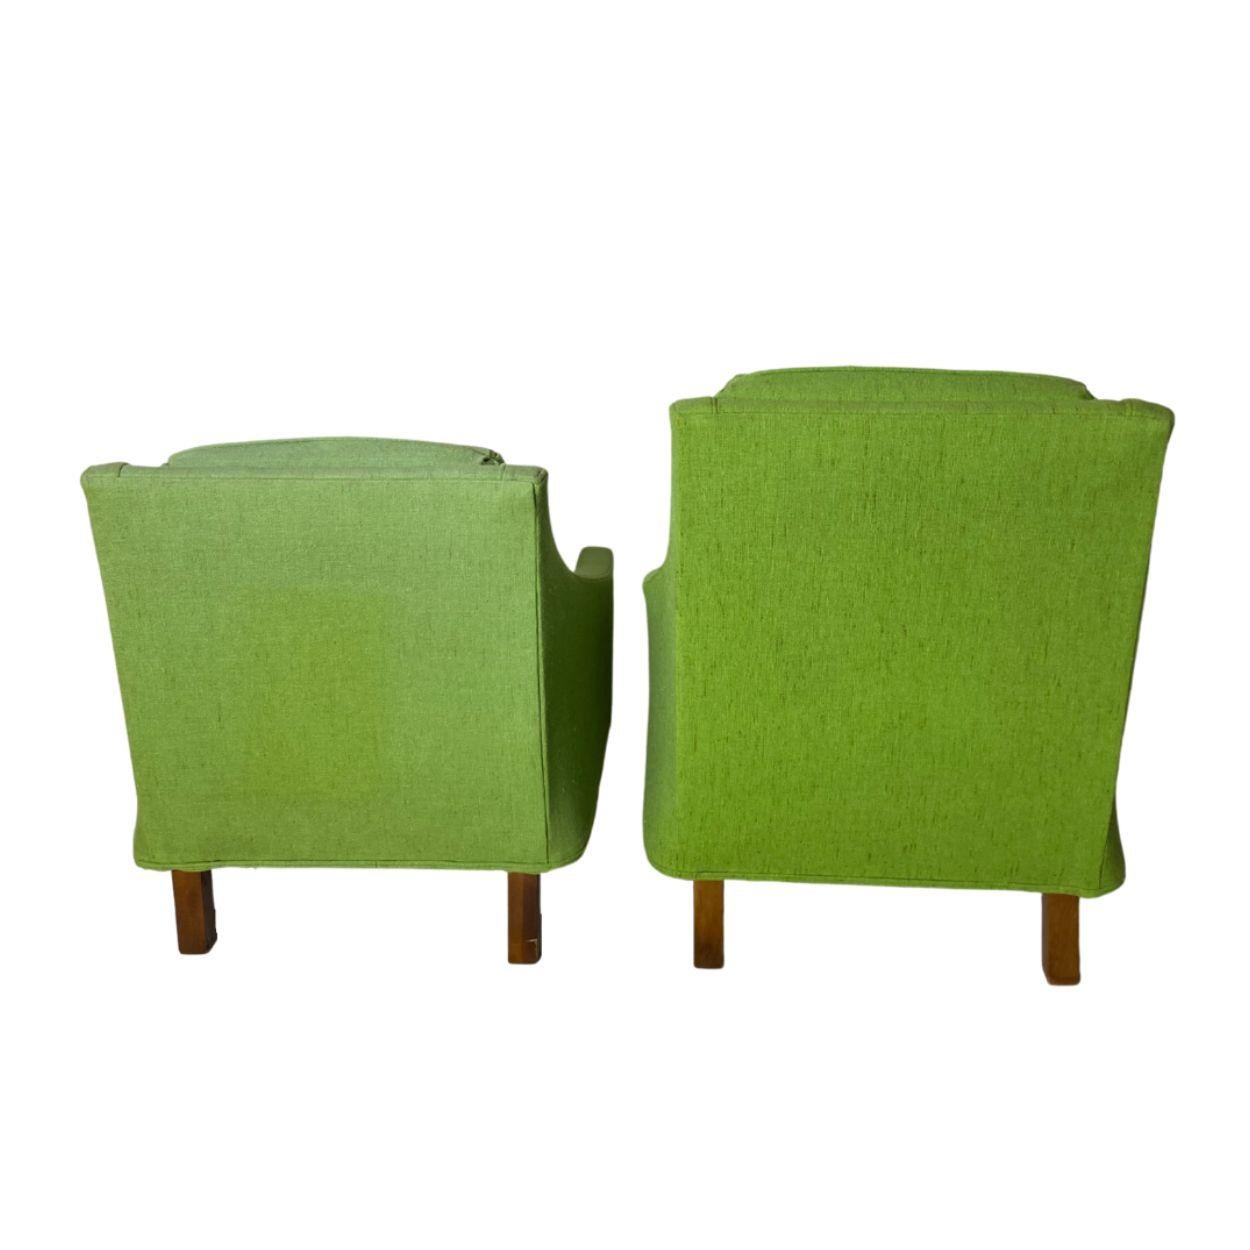 American 1970s Mid-Century Modern Broyhill Lounge Chairs, A Pair